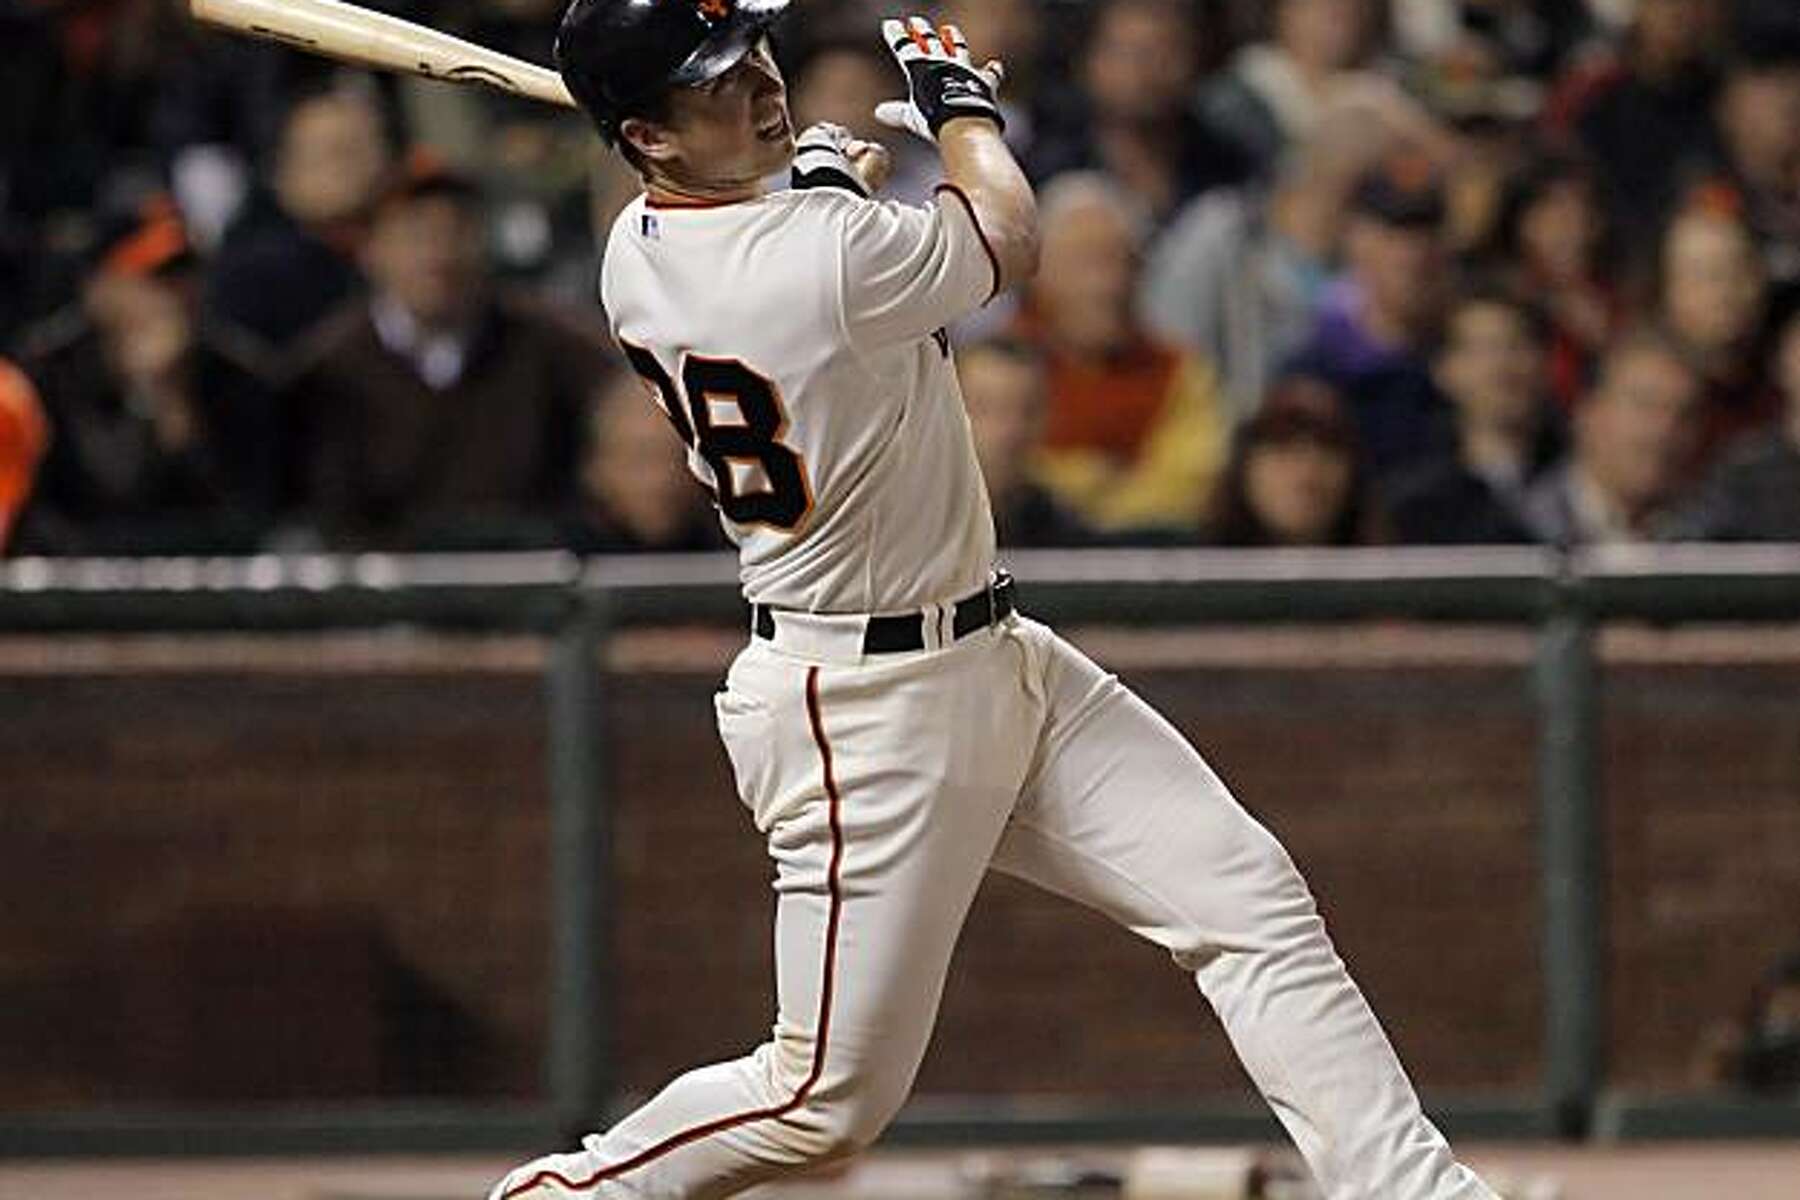 What has Giants' catcher Buster Posey finally swinging for the